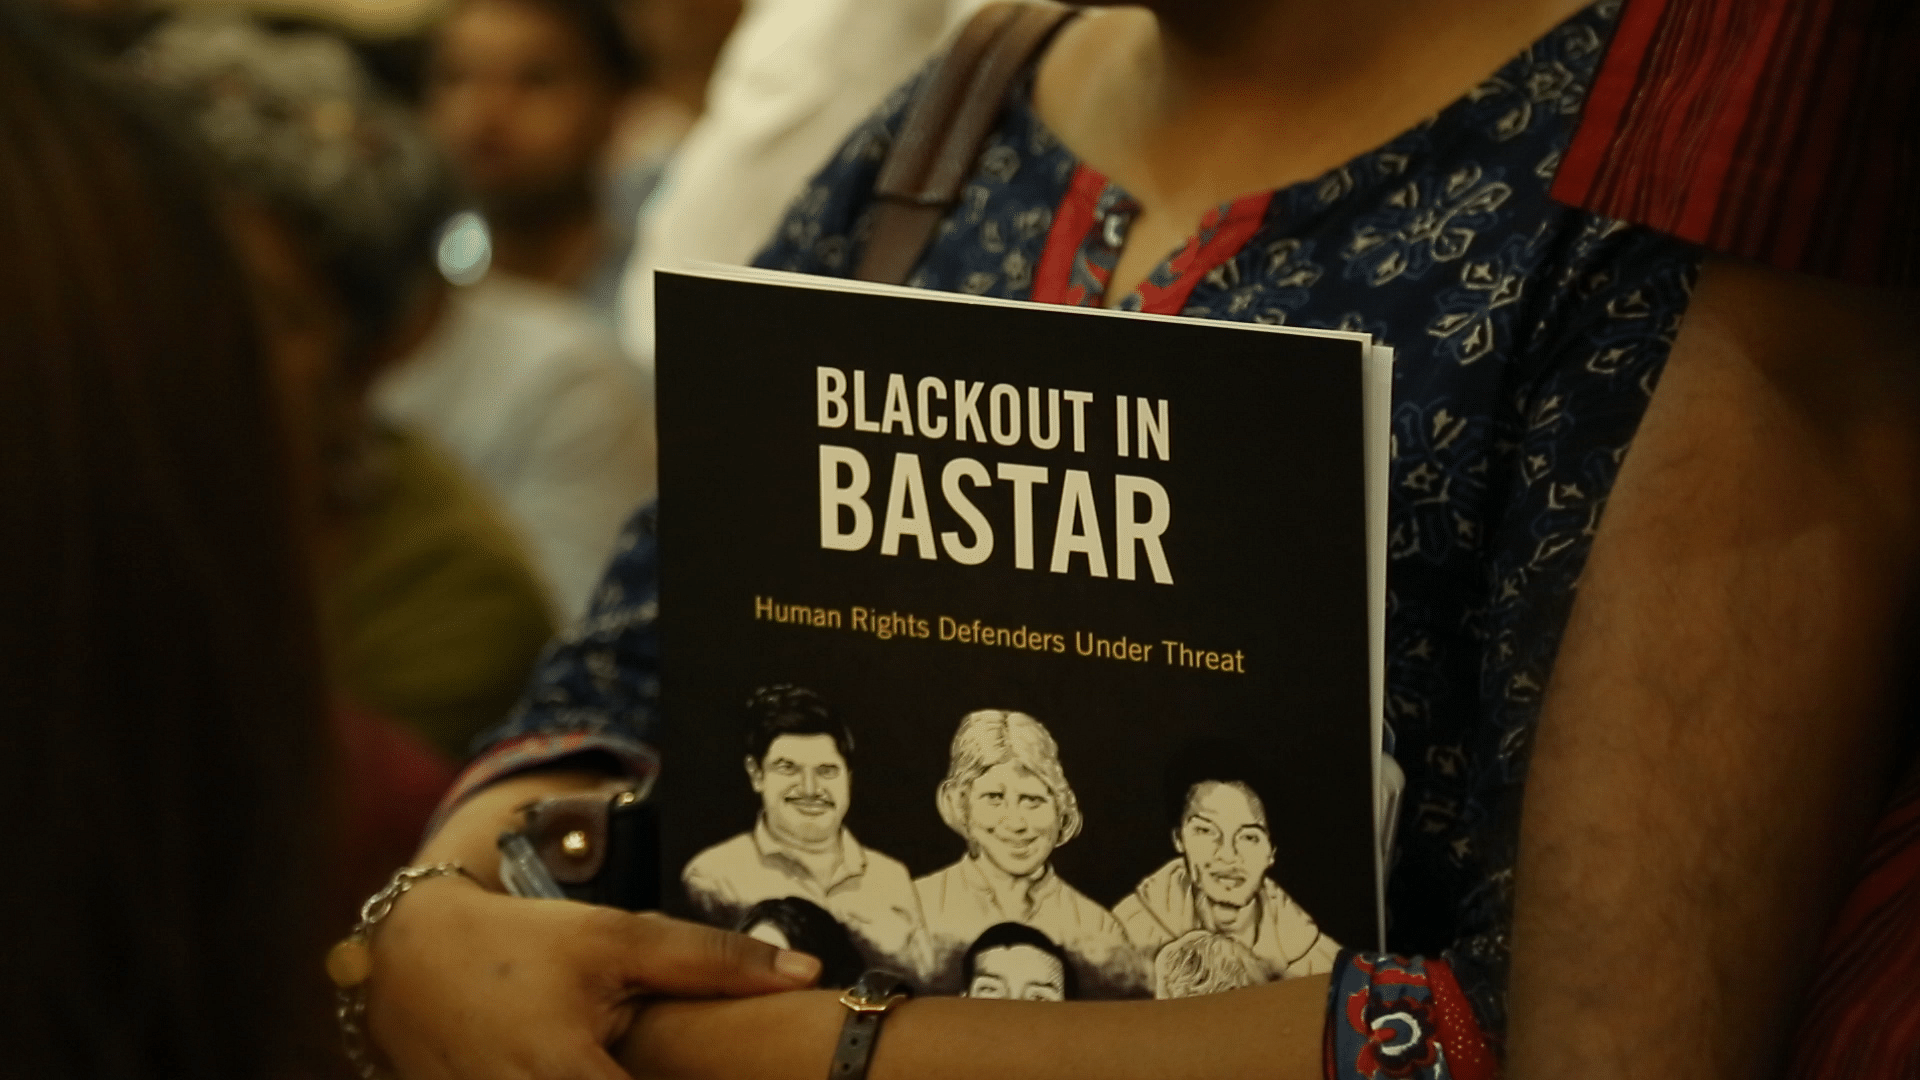 Amnesty International released a 24-page report on the crackdown in the state on the media and civil society in Bastar in Chattisgarh. (Photo: The Quint)